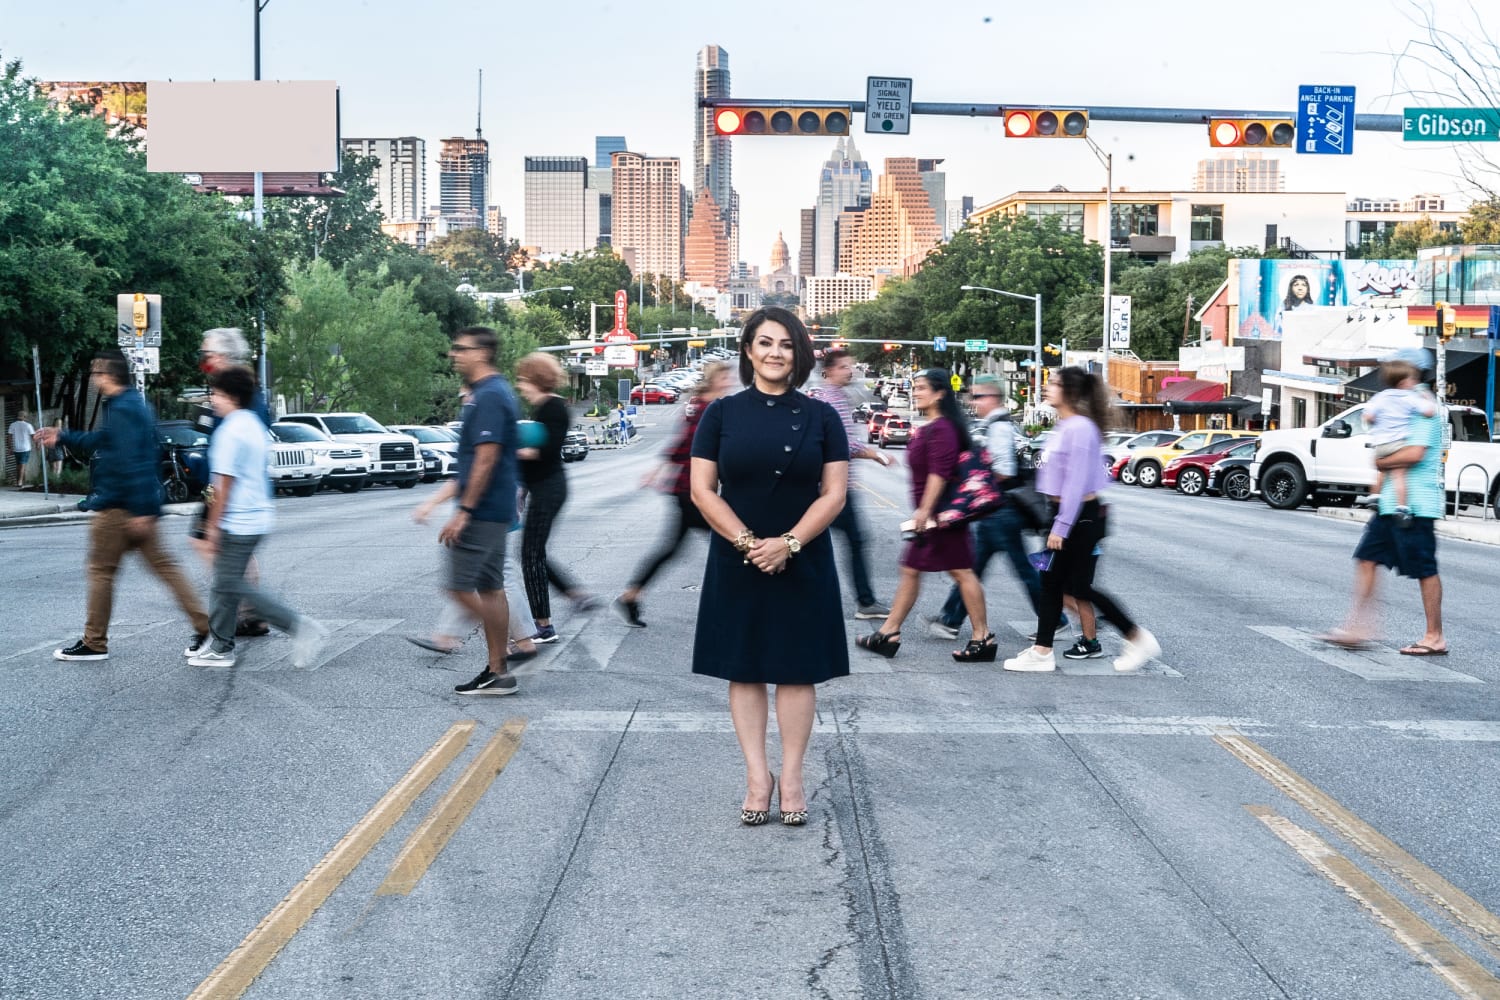 A struggle to breathe and a vow: Latina former journalist wants to be next Texas governor